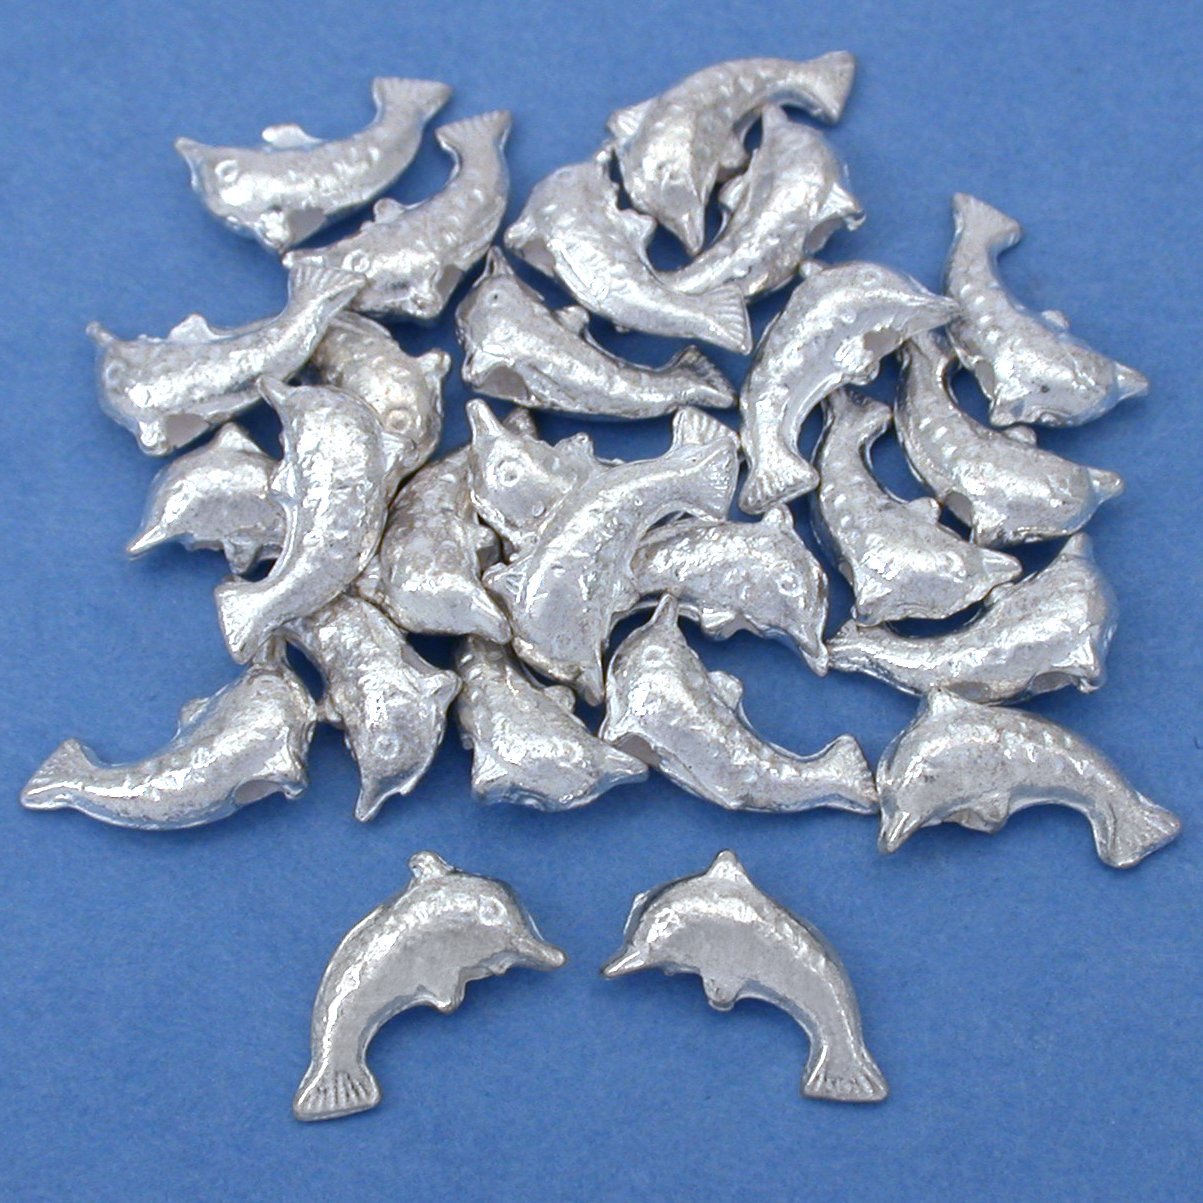 Primary image for Bali Dolphin Silver Plated Beads 9.5mm 15 Grams 25Pcs Approx.